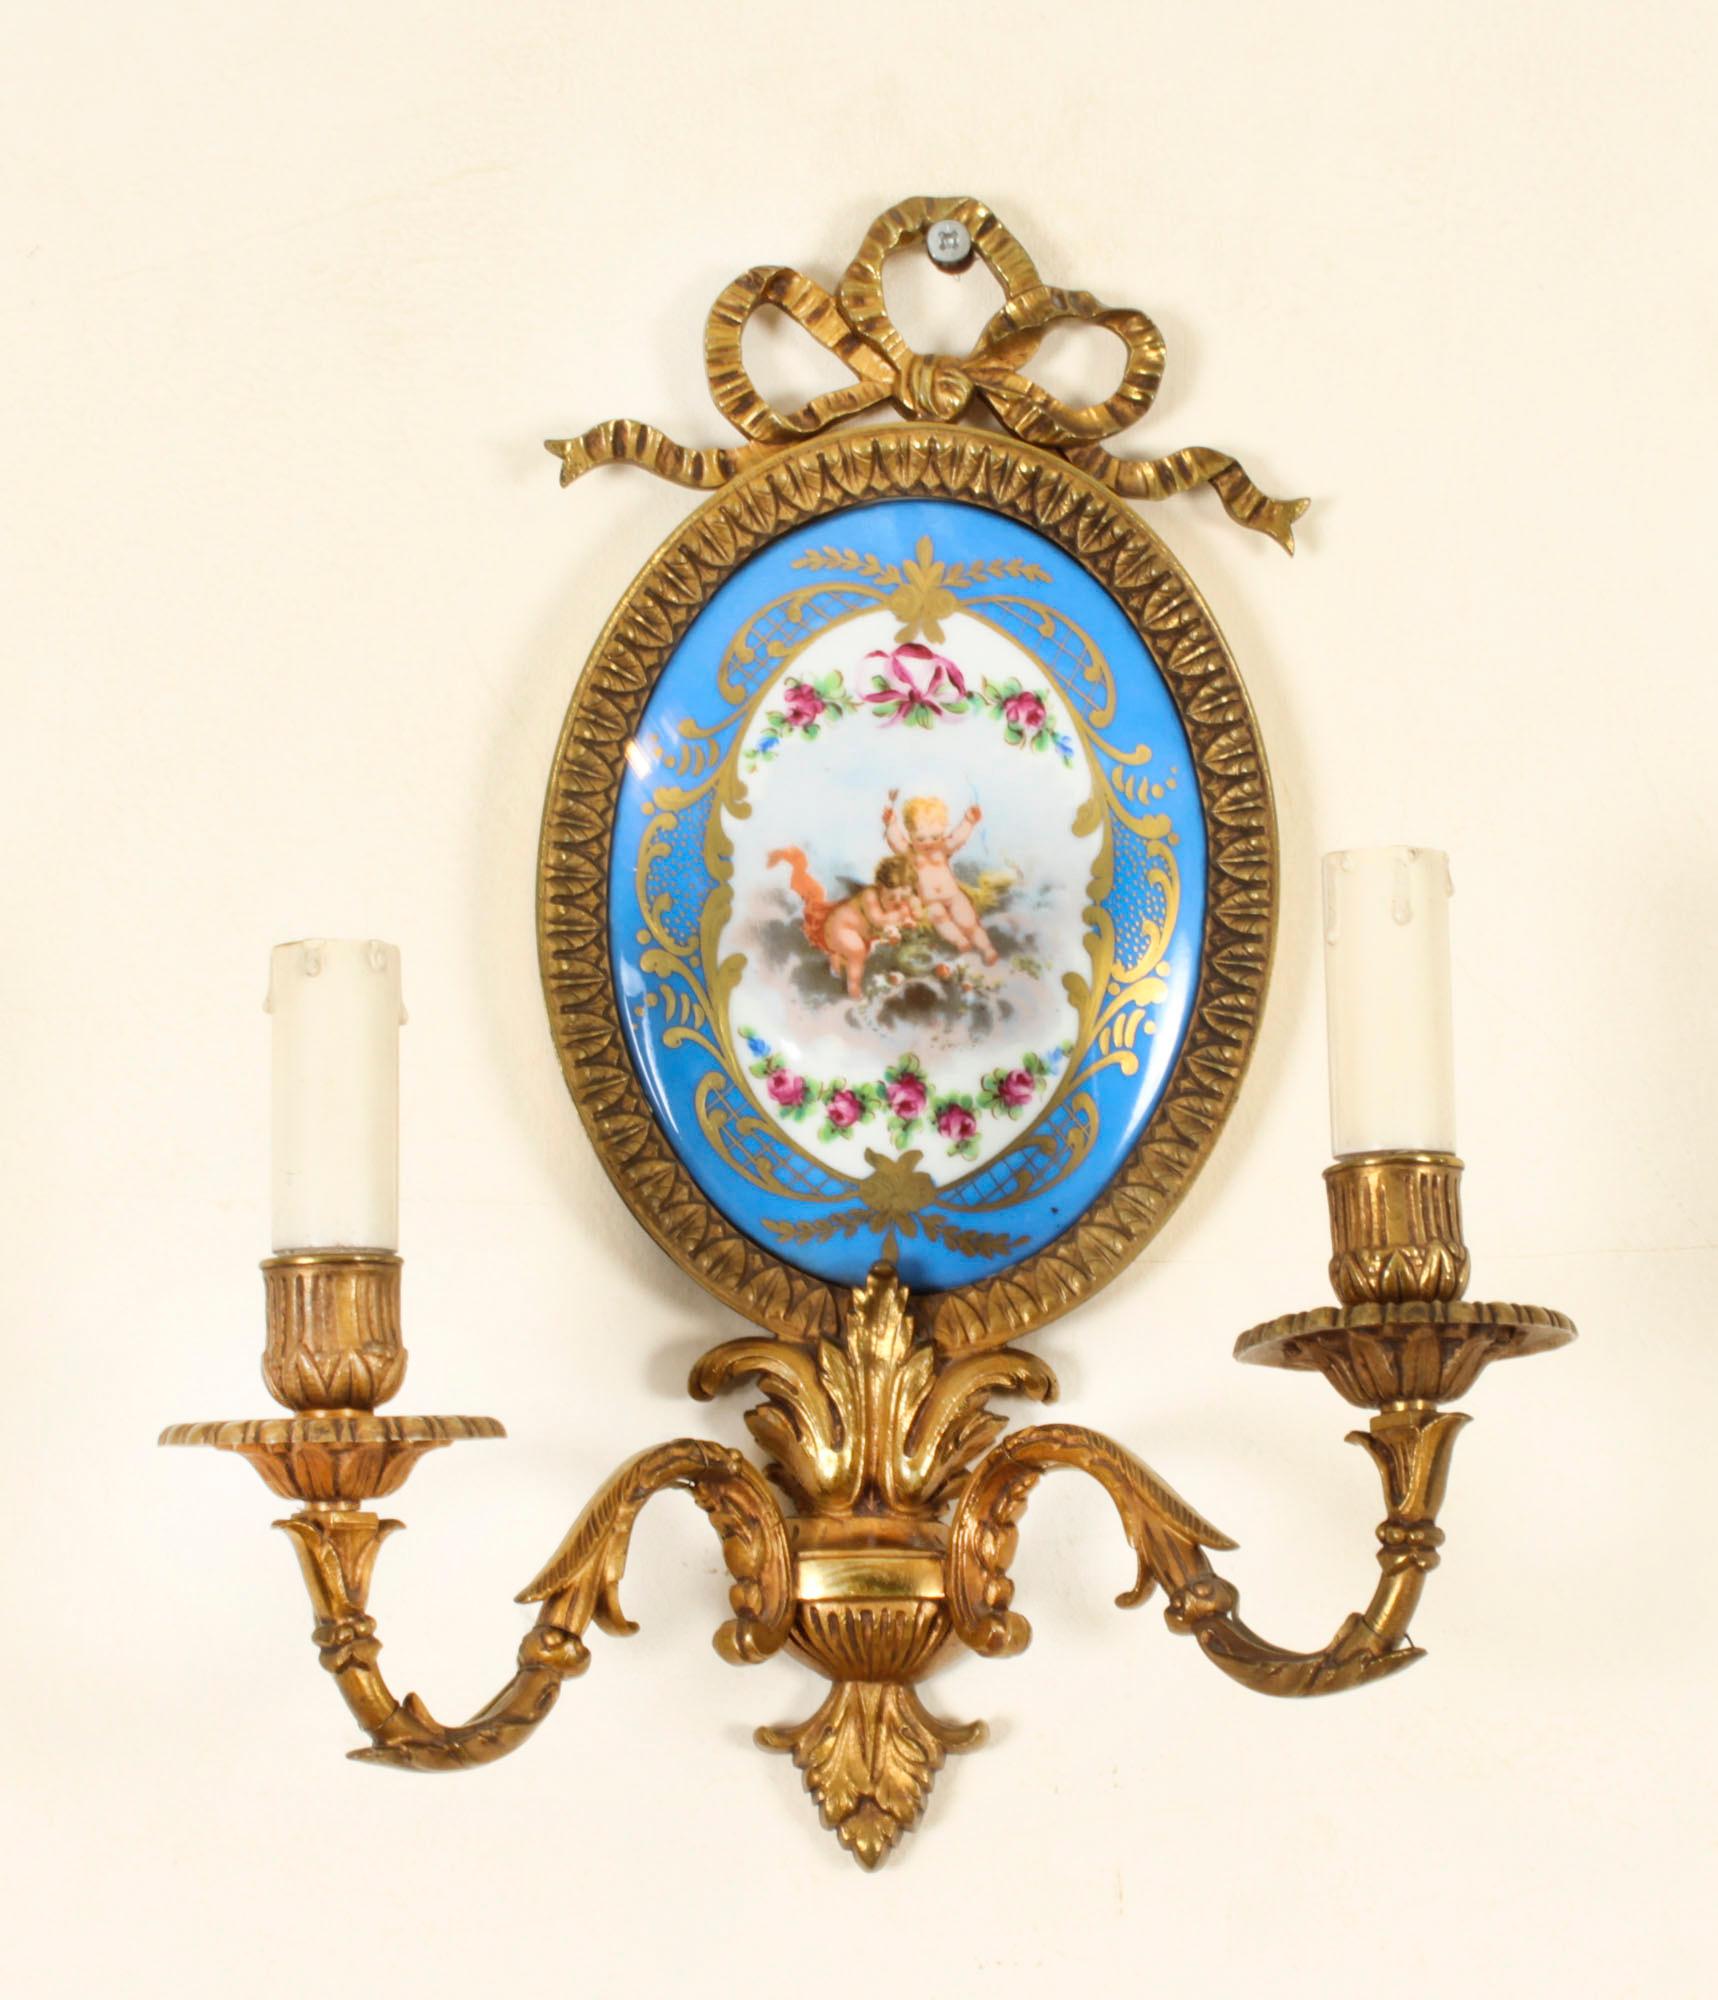 This is a stunning Antique pair of Sevres porcelain and ormolu wall lights,  Circa 1870 in date.

They feature hand painted oval plaques depicting cherubs in clouds surrounded by floral drapes with gilt high-lights and ormolu leaf cast mounts and